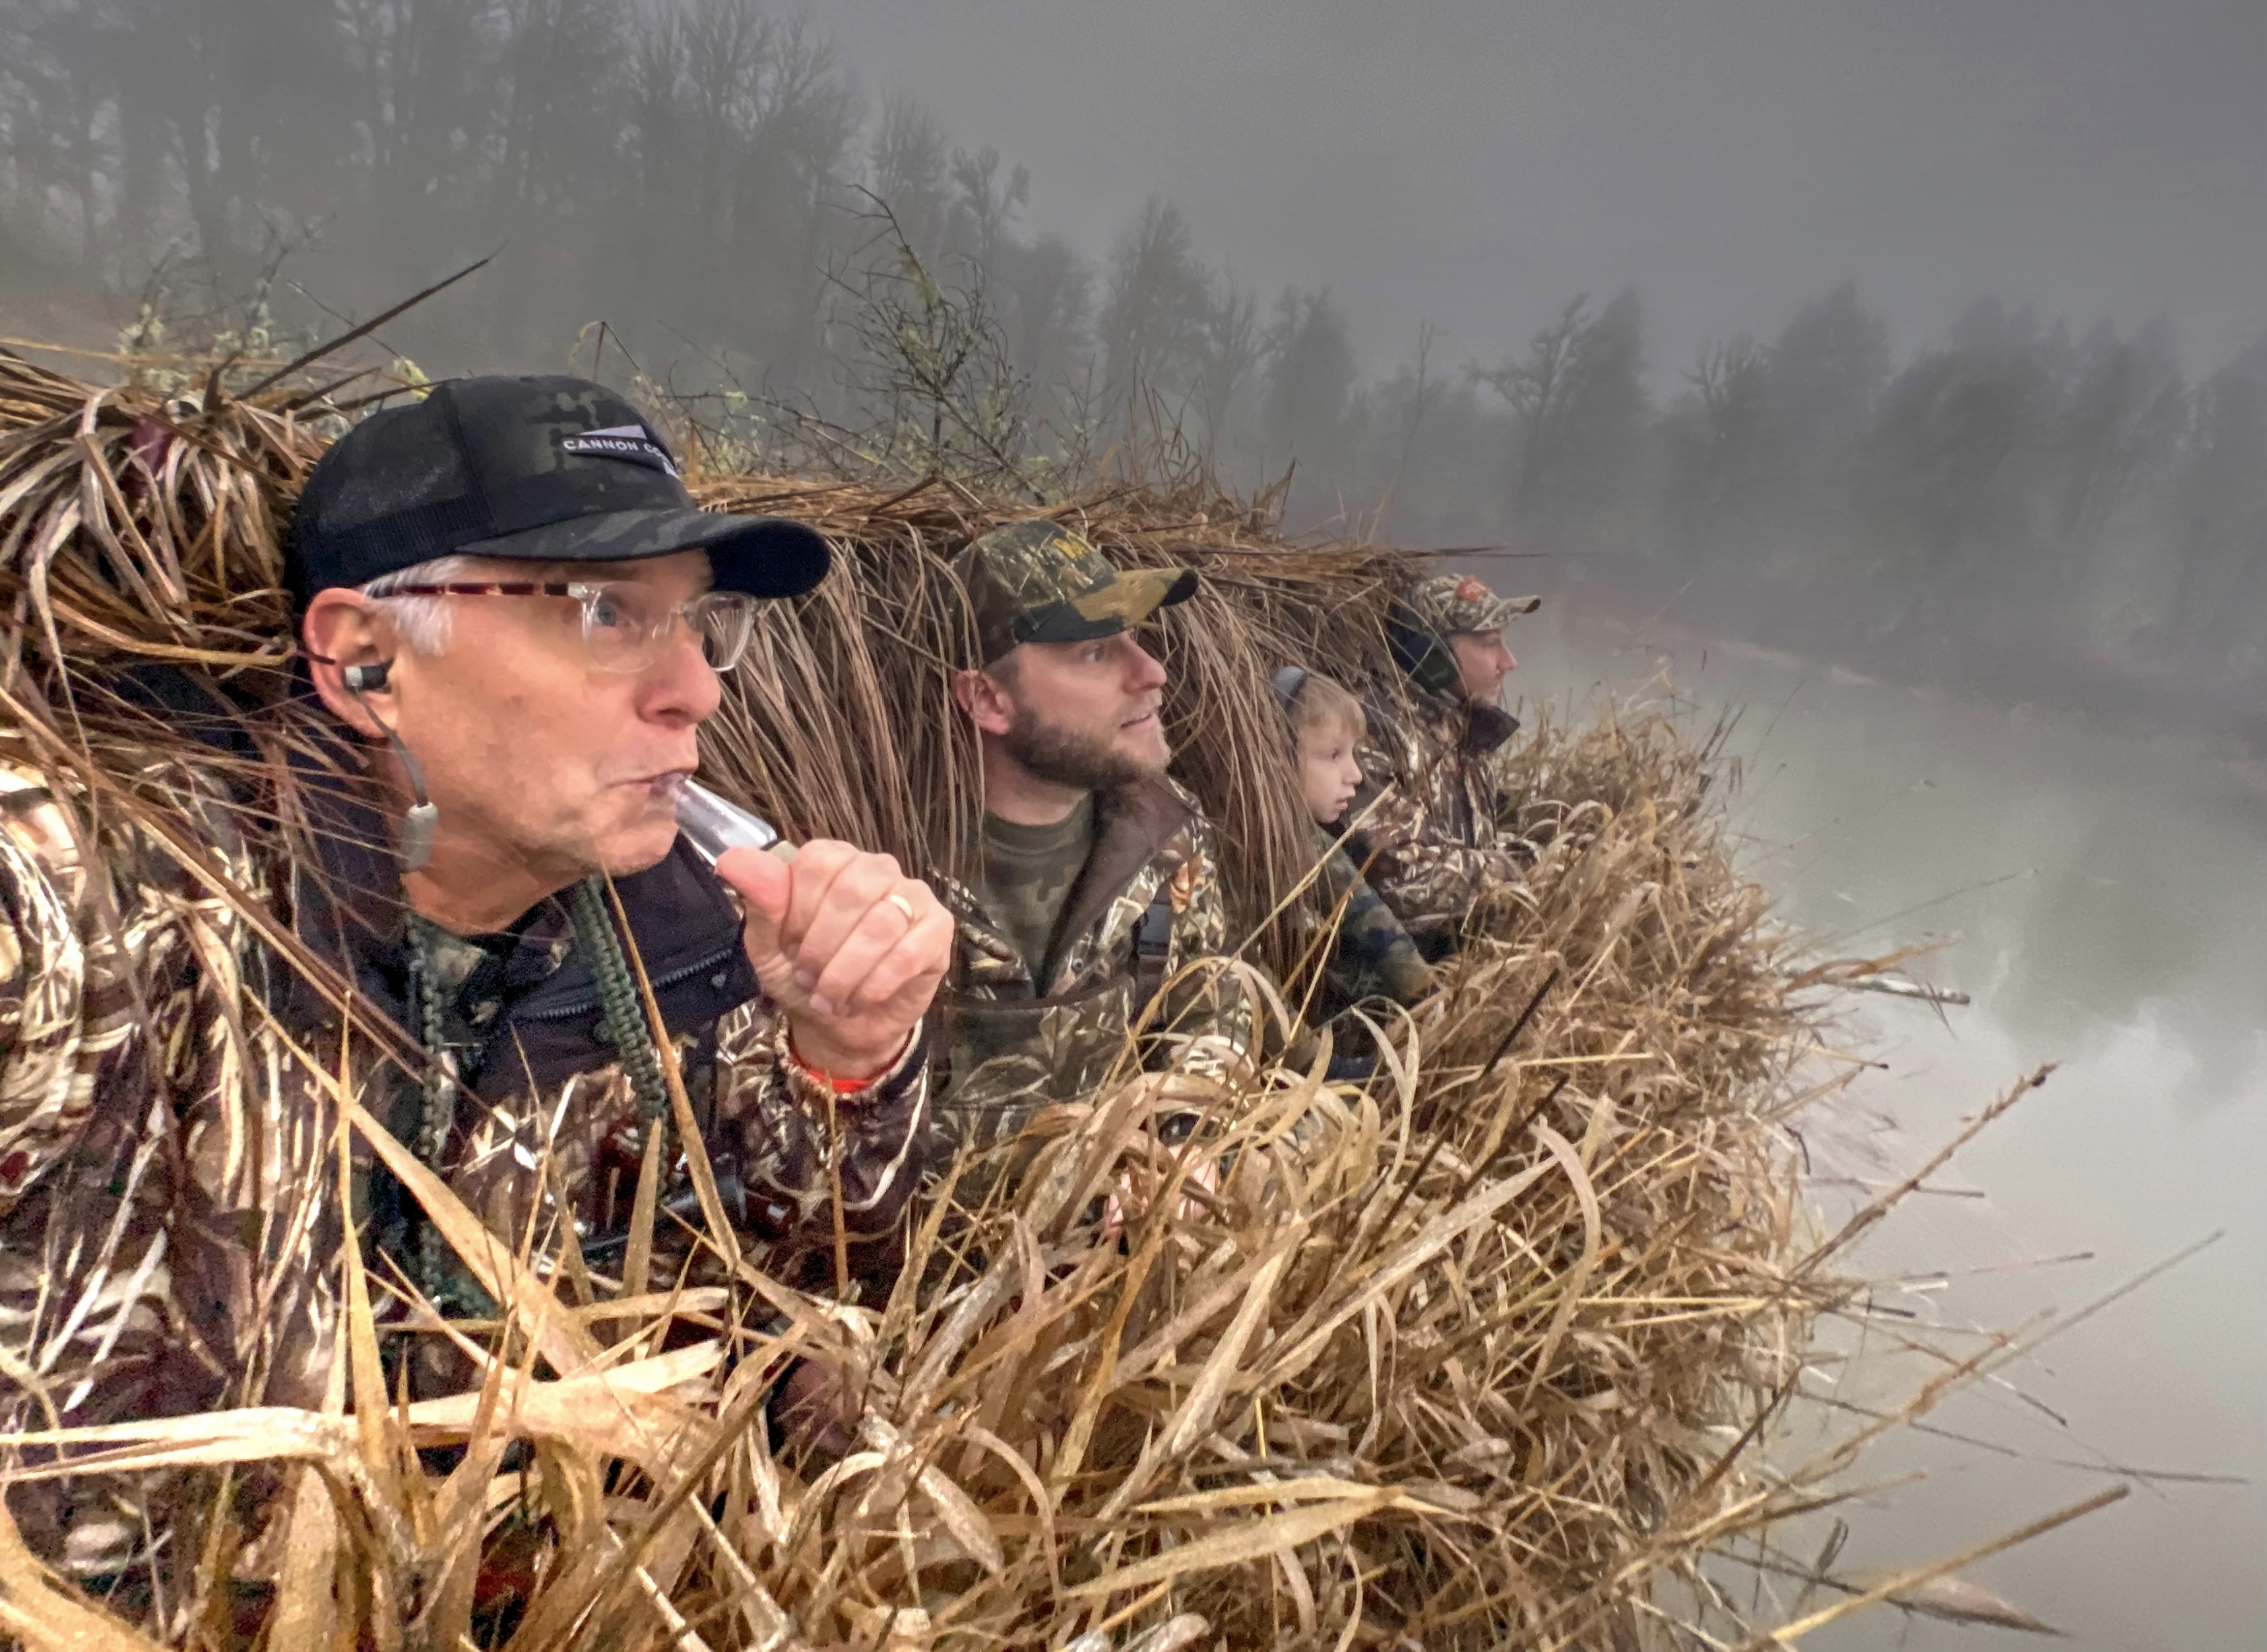 Family waterfowl hunting